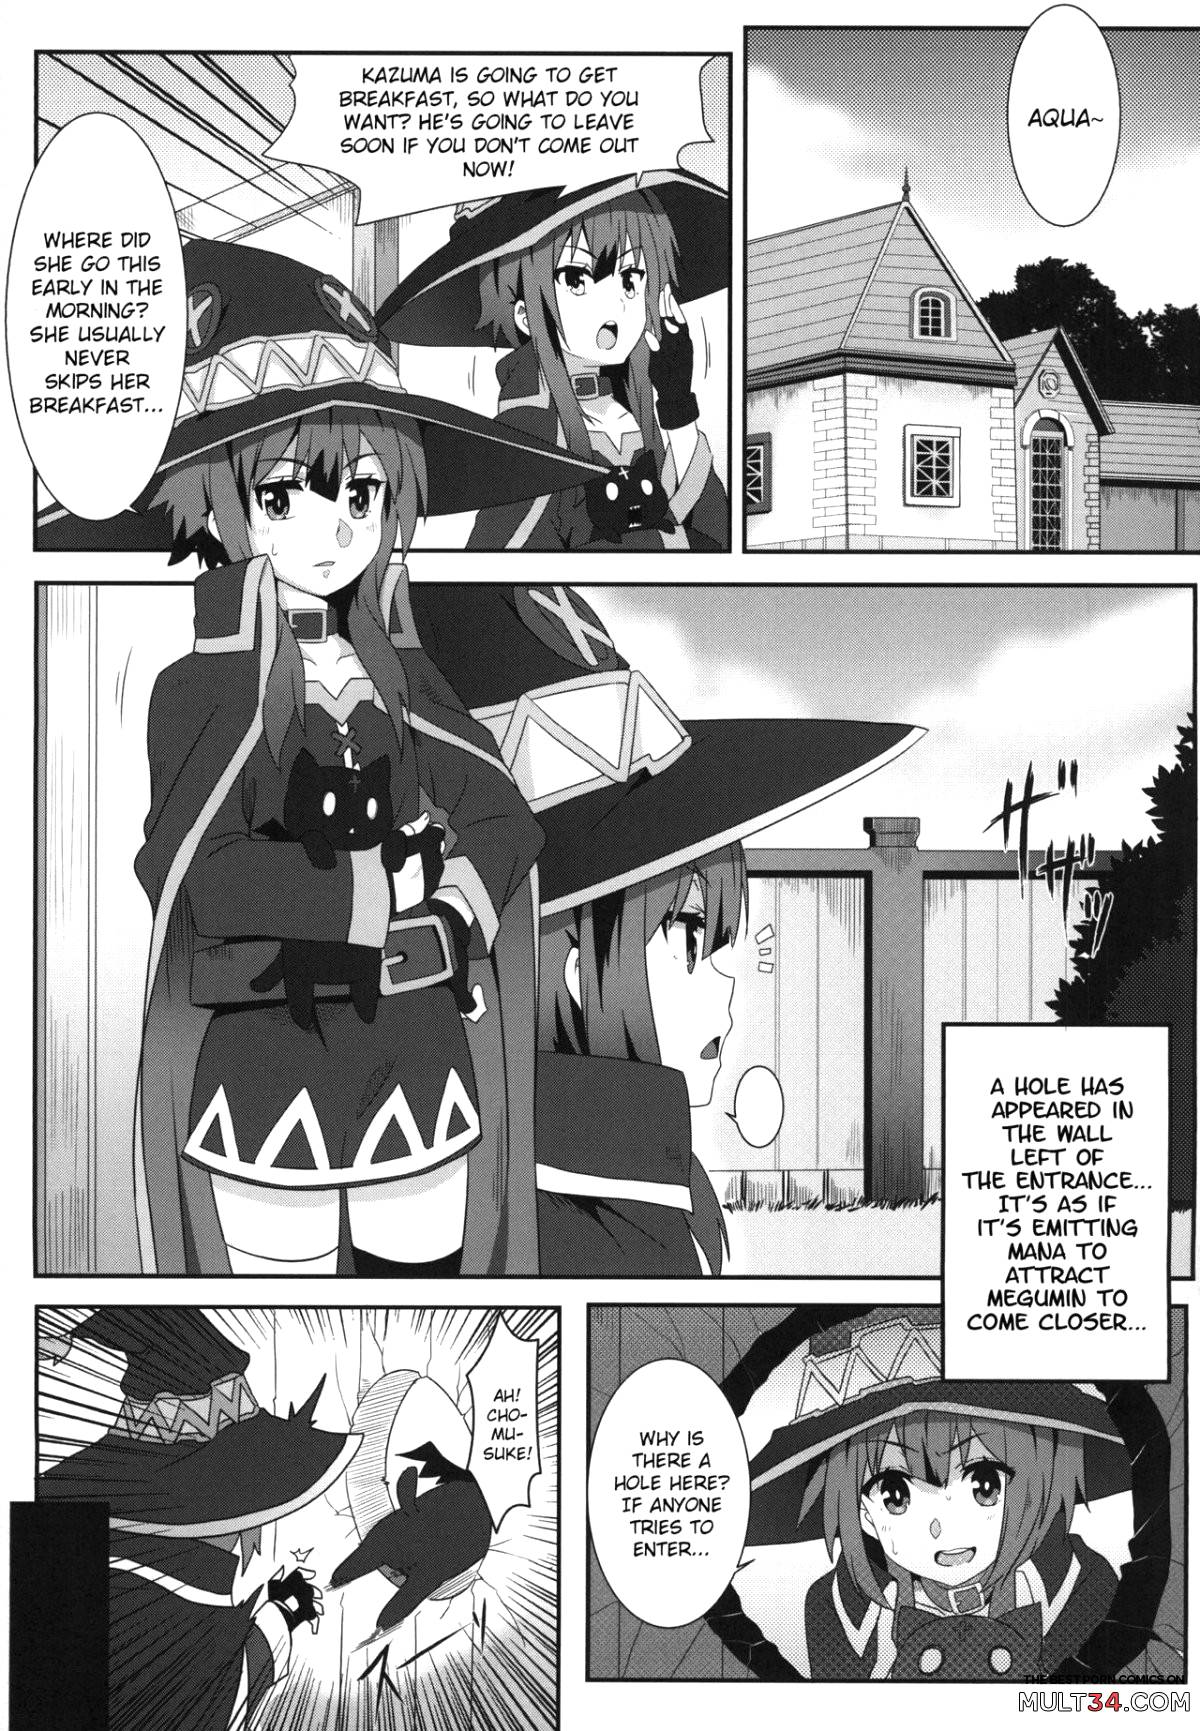 Blessing Megumin with a Magnificence Explosion! 3 page 3